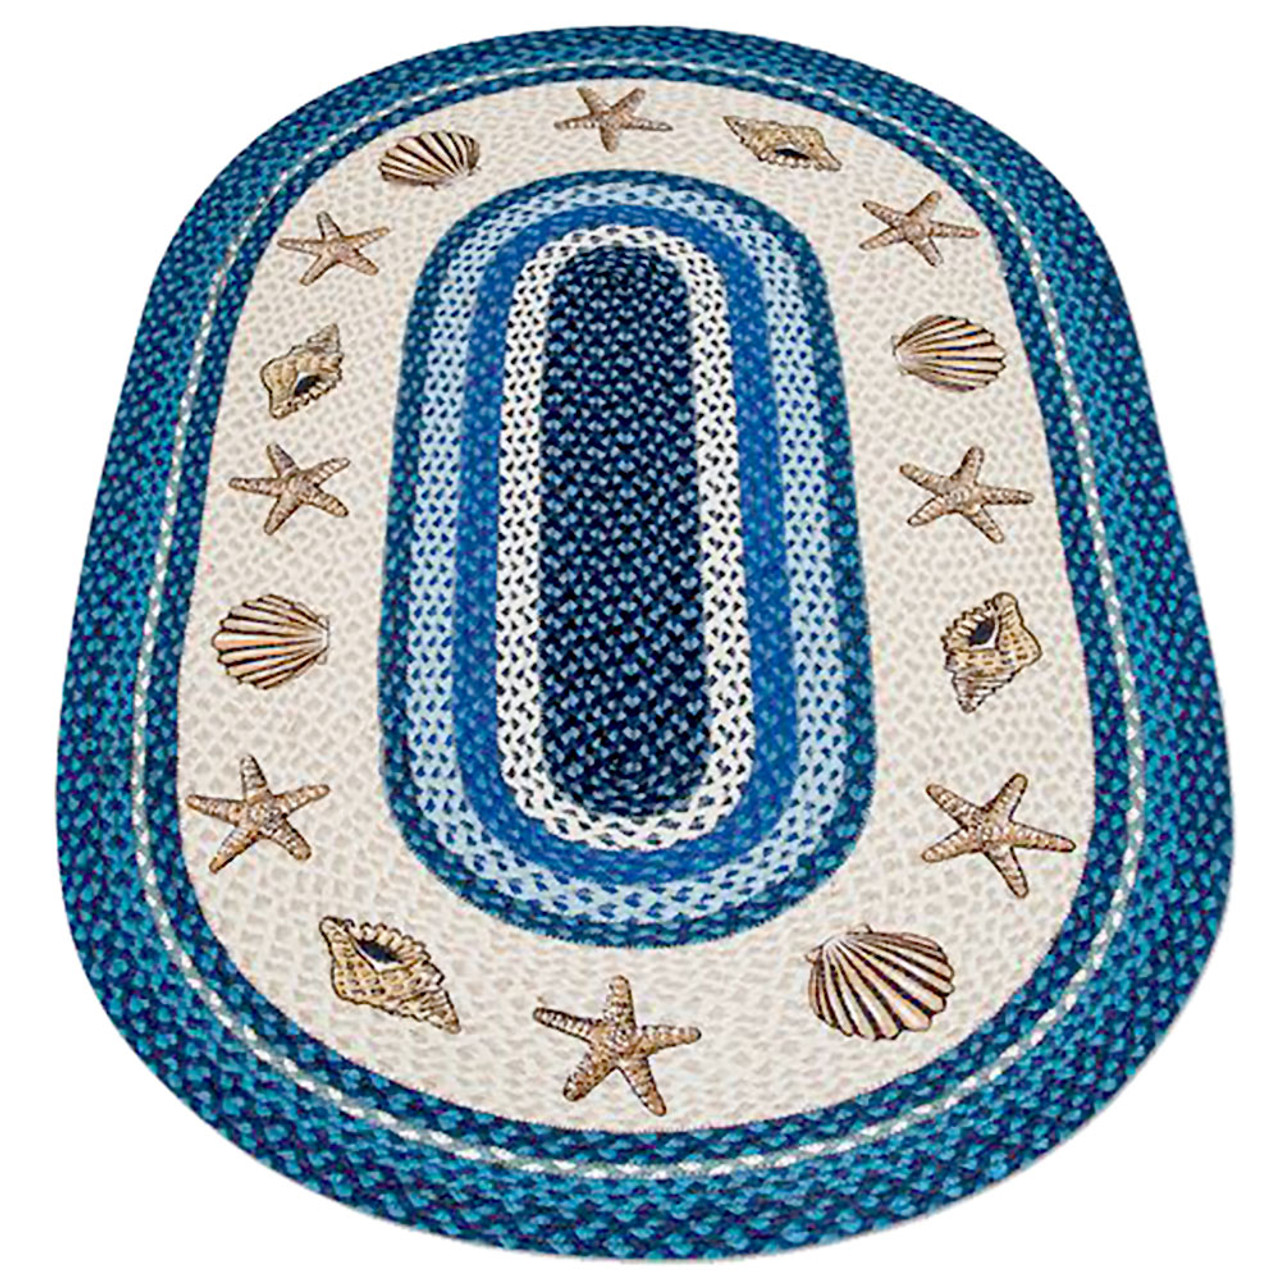 Jute Braided Rug Blue Sea Shells Oval Patch Rug 20"x30" by Earth Rugs 